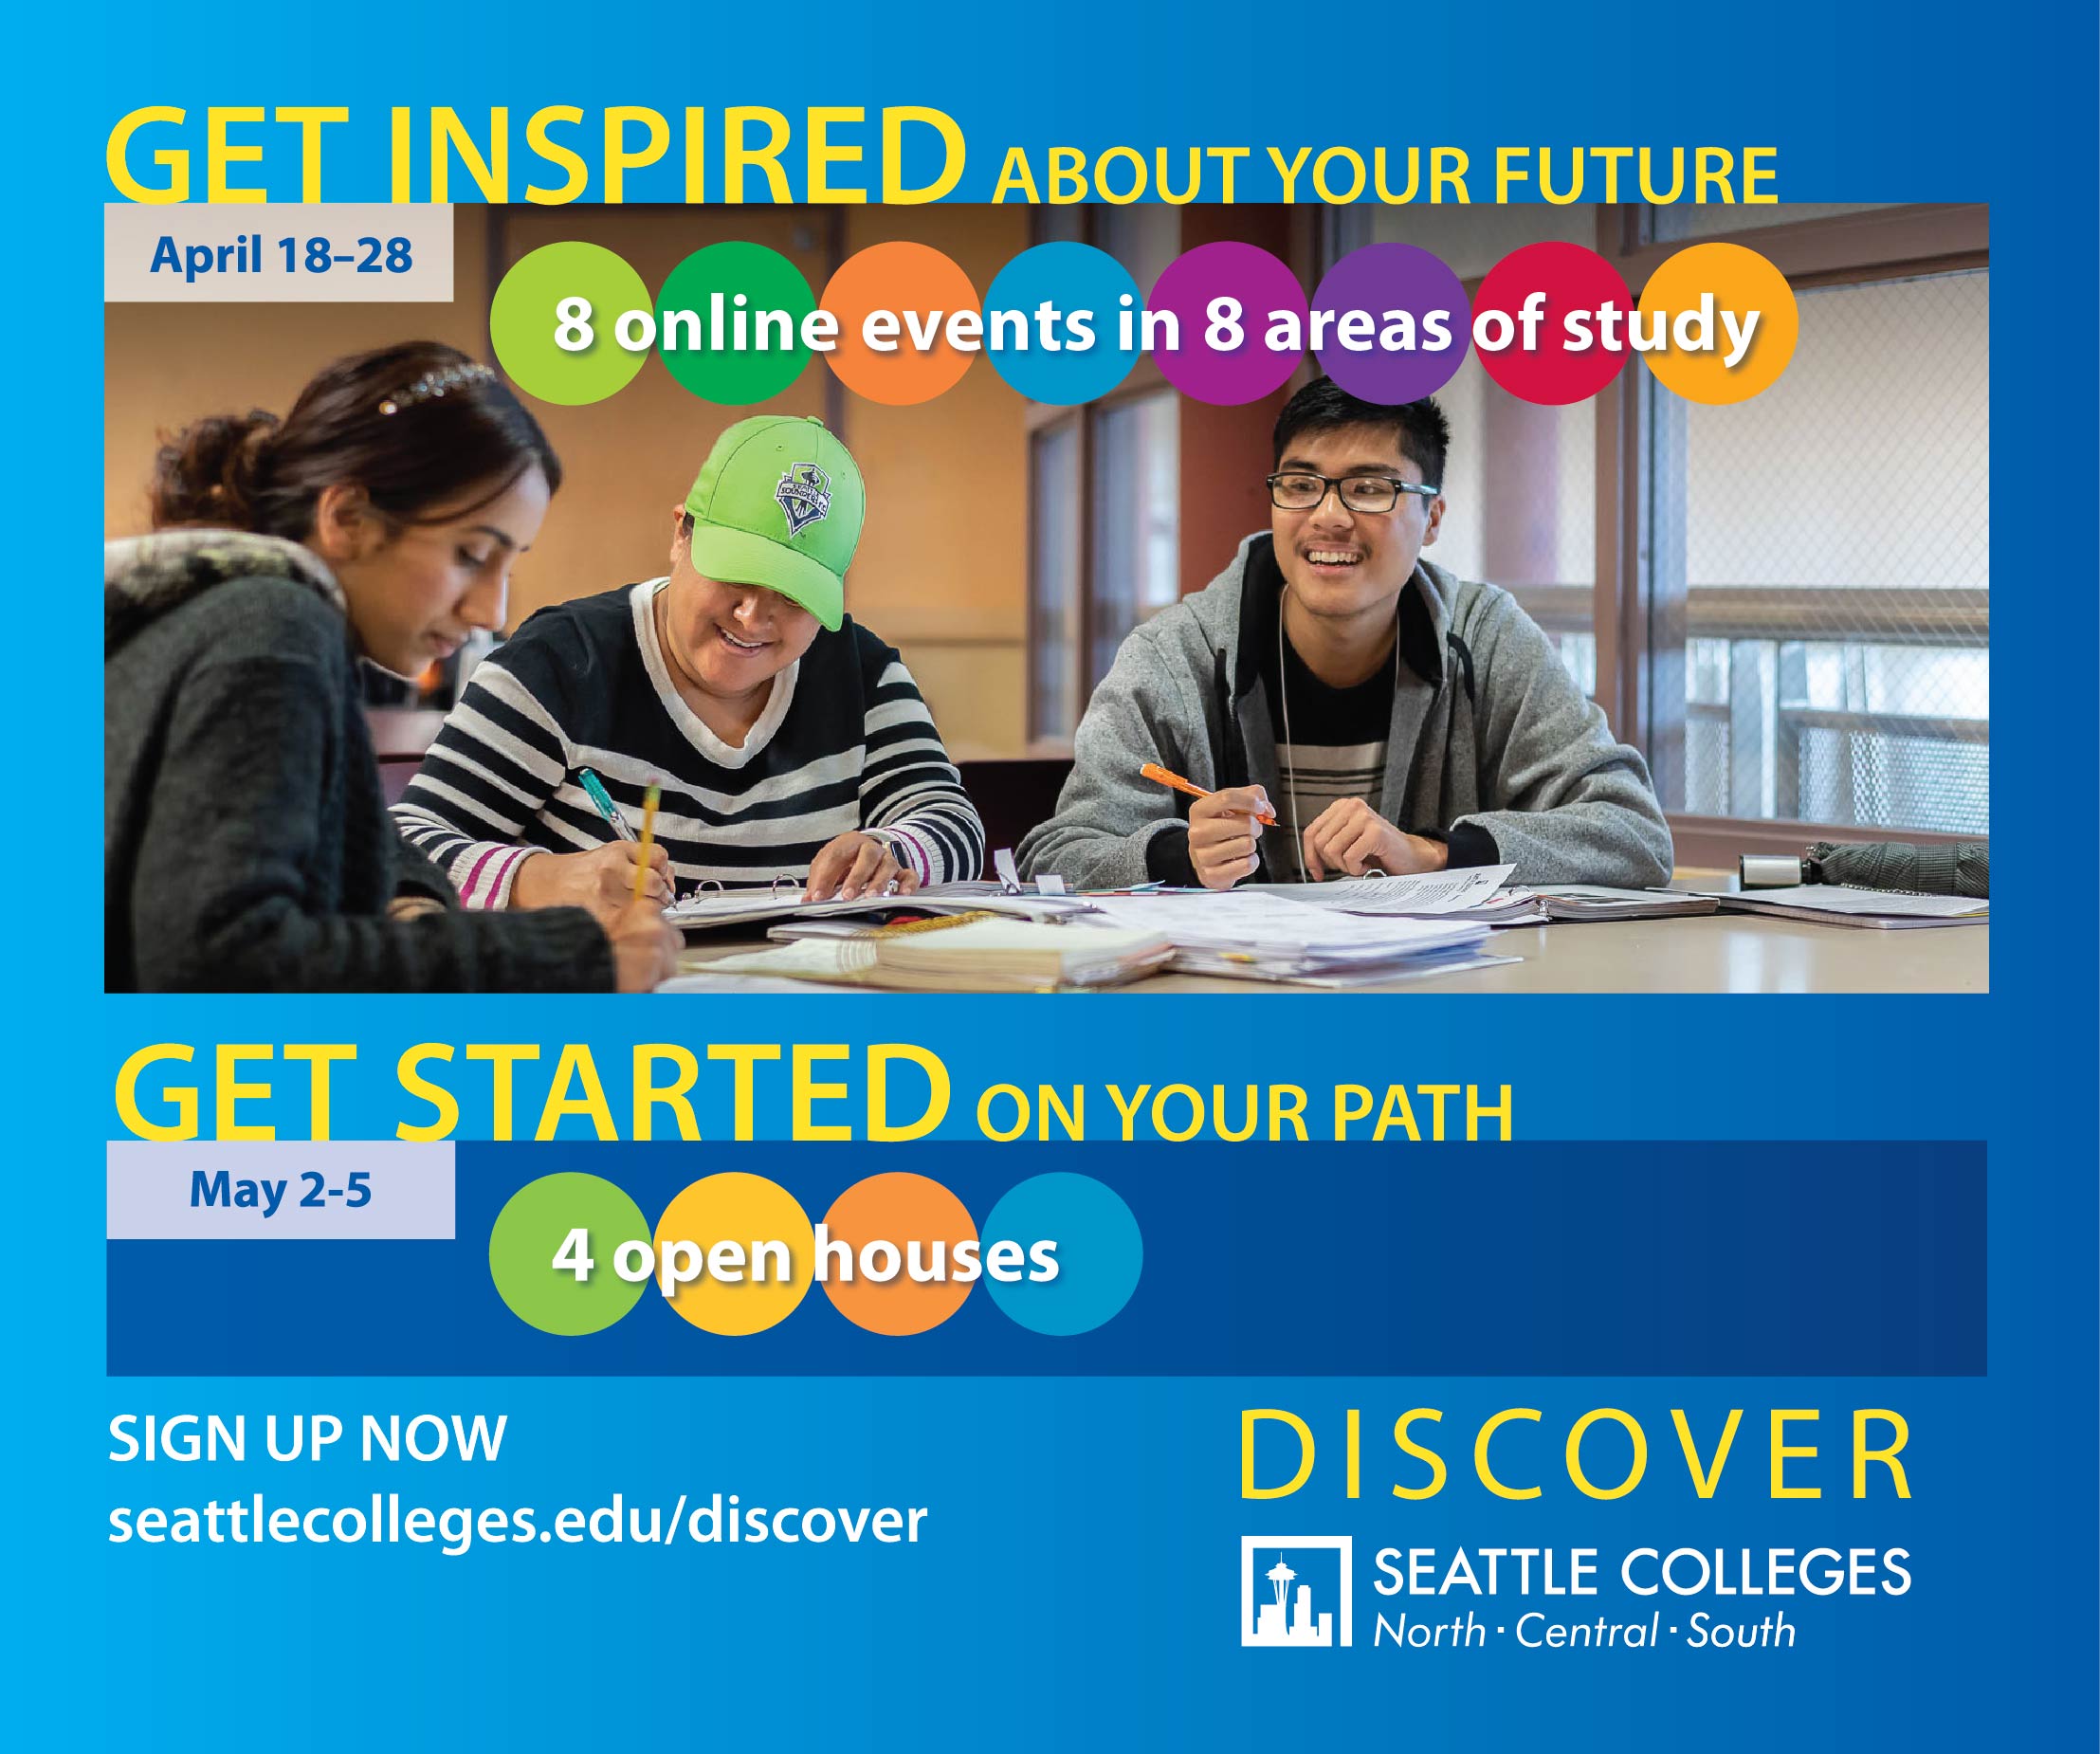 Discover Seattle Colleges April 18-28